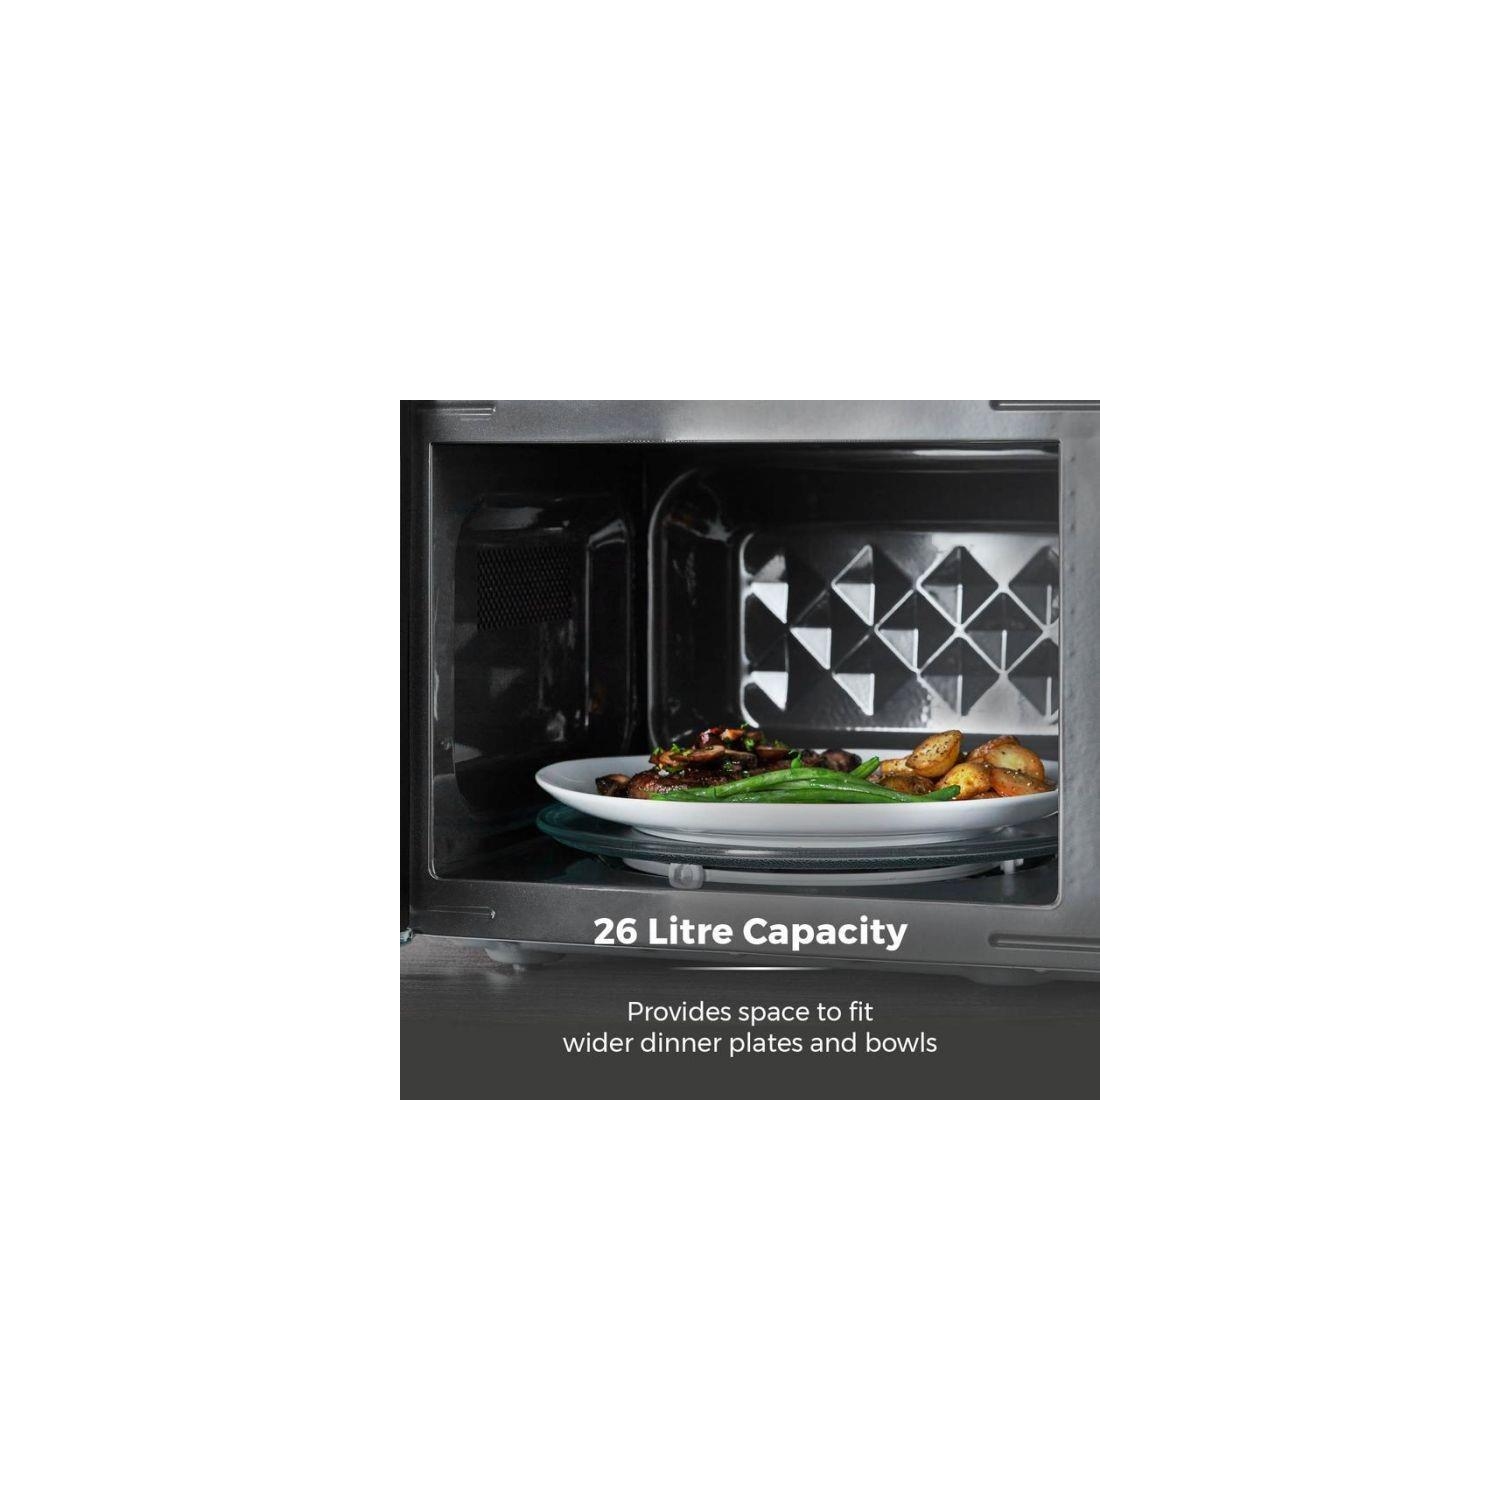 26L 900w black touch control microwave - 0